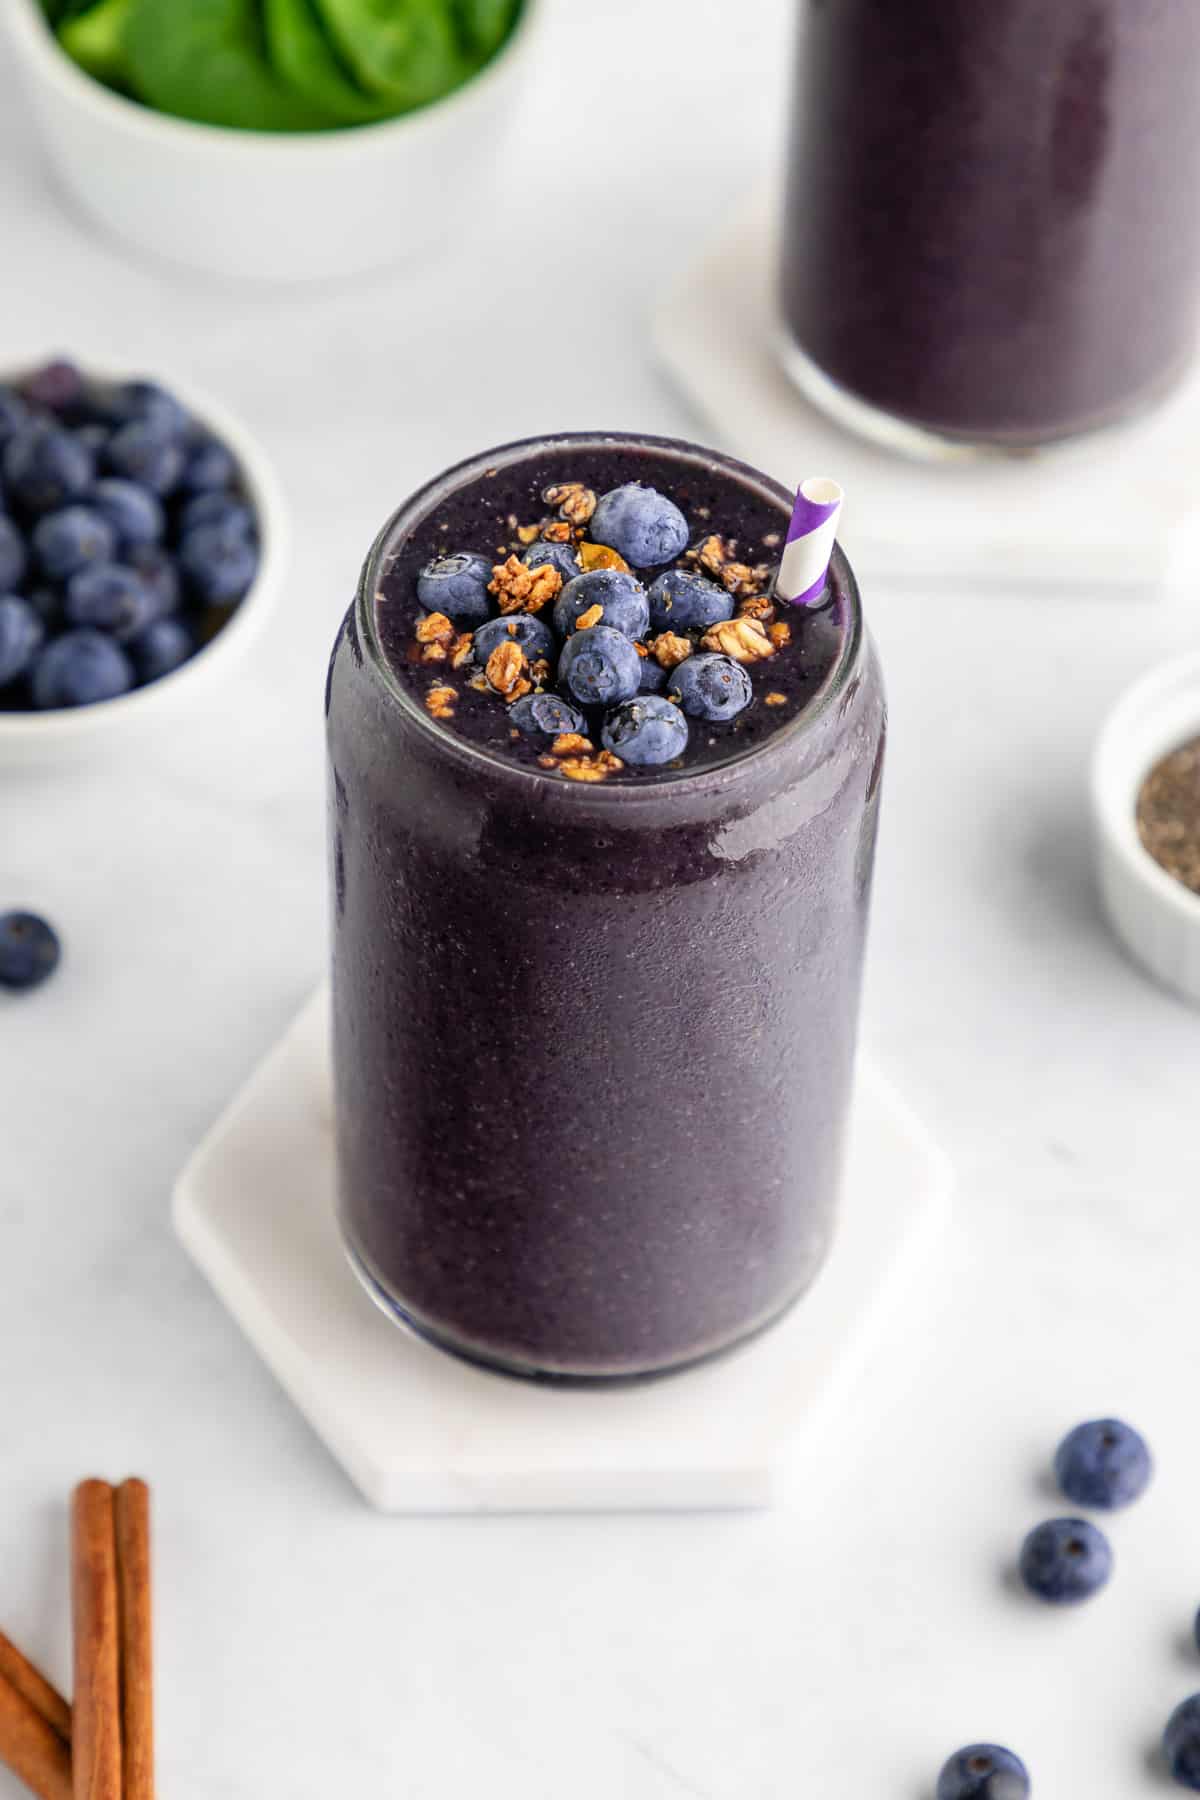 a blueberry spinach smoothie with bananas and chia seeds inside a glass